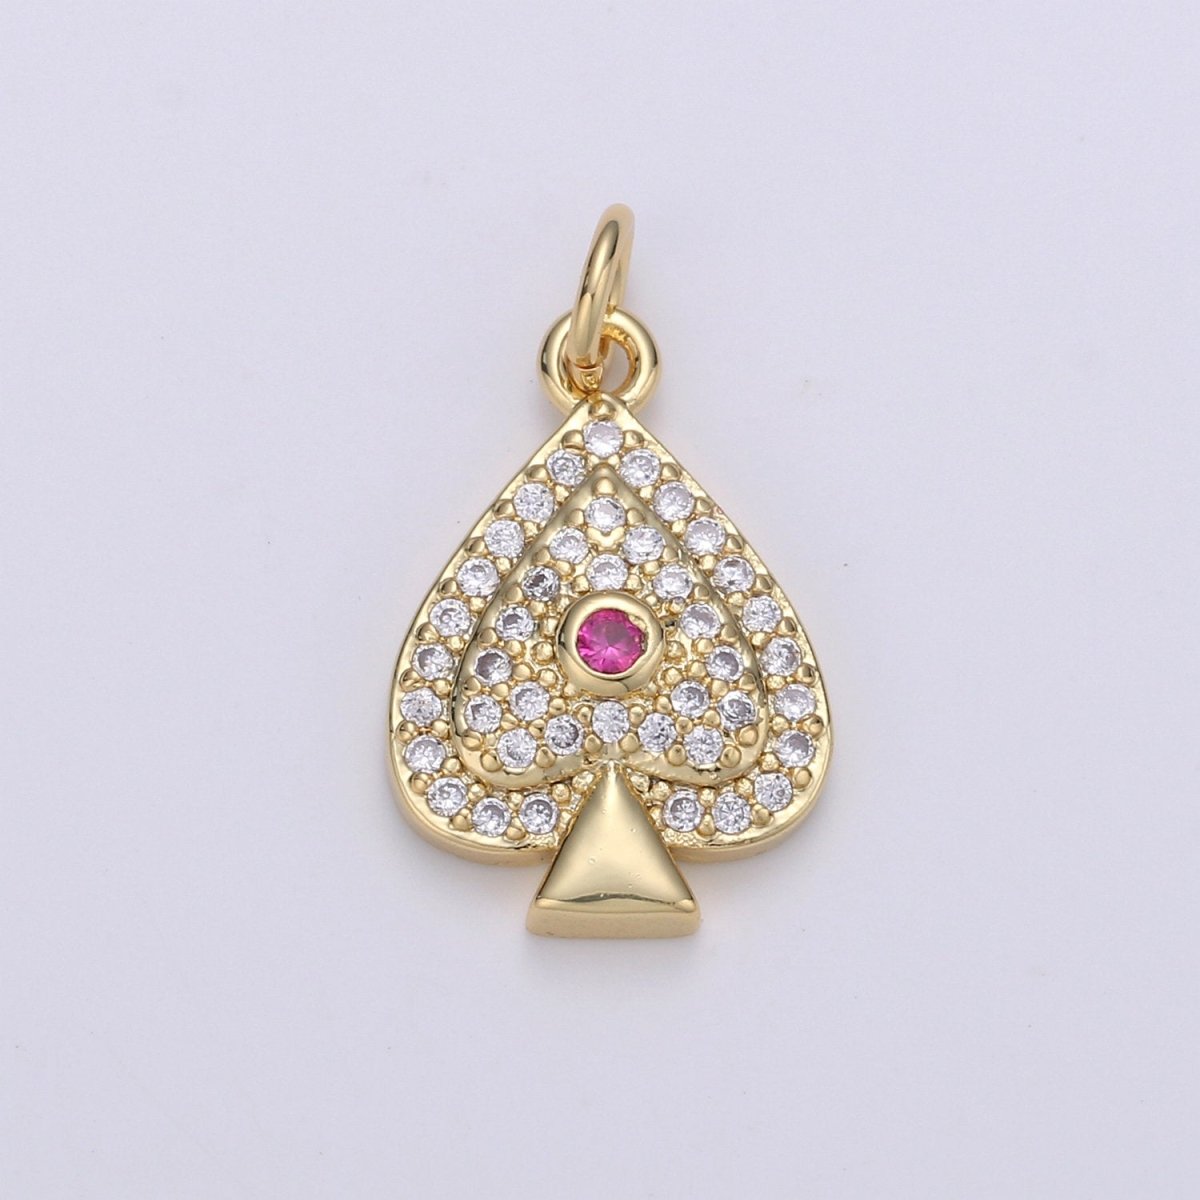 14k Gold Filled Spade Charm ACE of Spades tiny Spade Pendant Poker Charm Jewelry Silver Ace Of Spade Charm for Necklace Earring Bracelet D-533 D-534 - DLUXCA